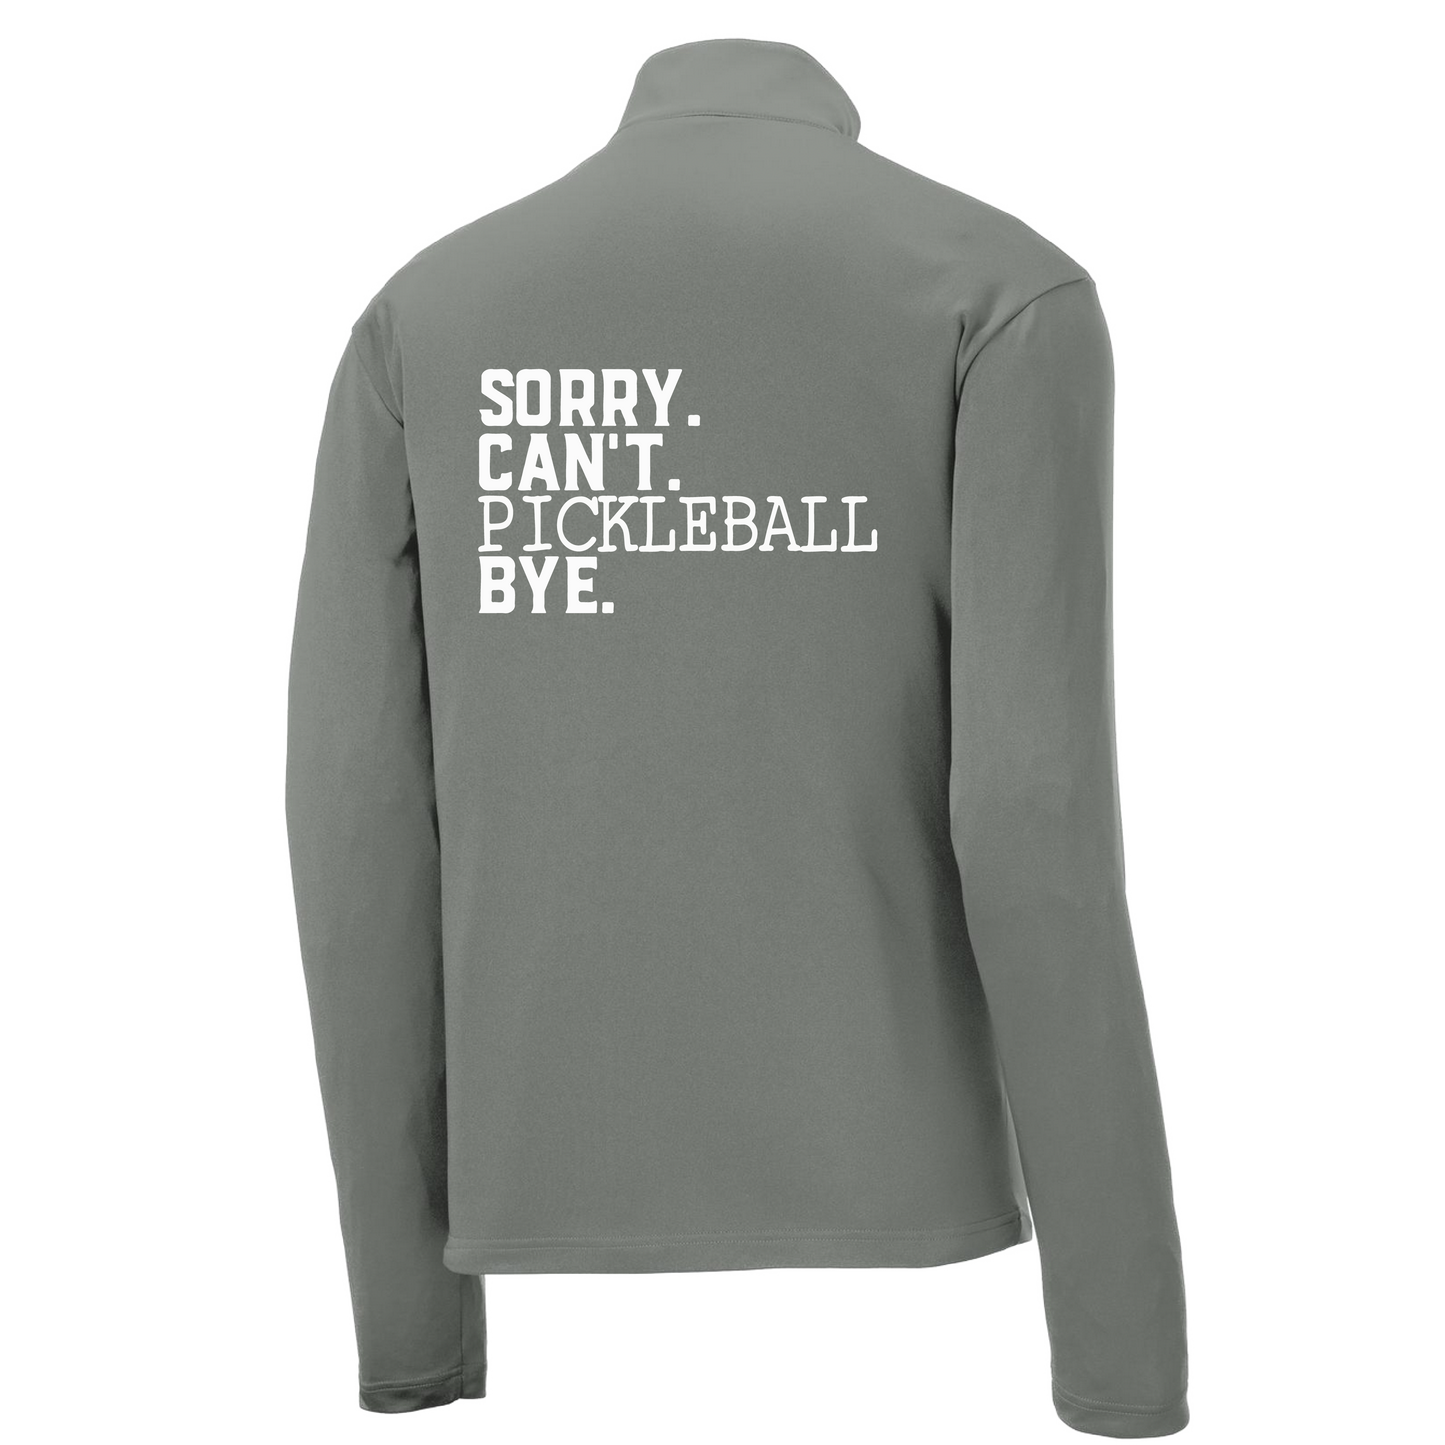 Sorry Can't Pickleball Bye | Men's 1/4 Zip Long Sleeve Pullover Athletic Shirt | 100% Polyester